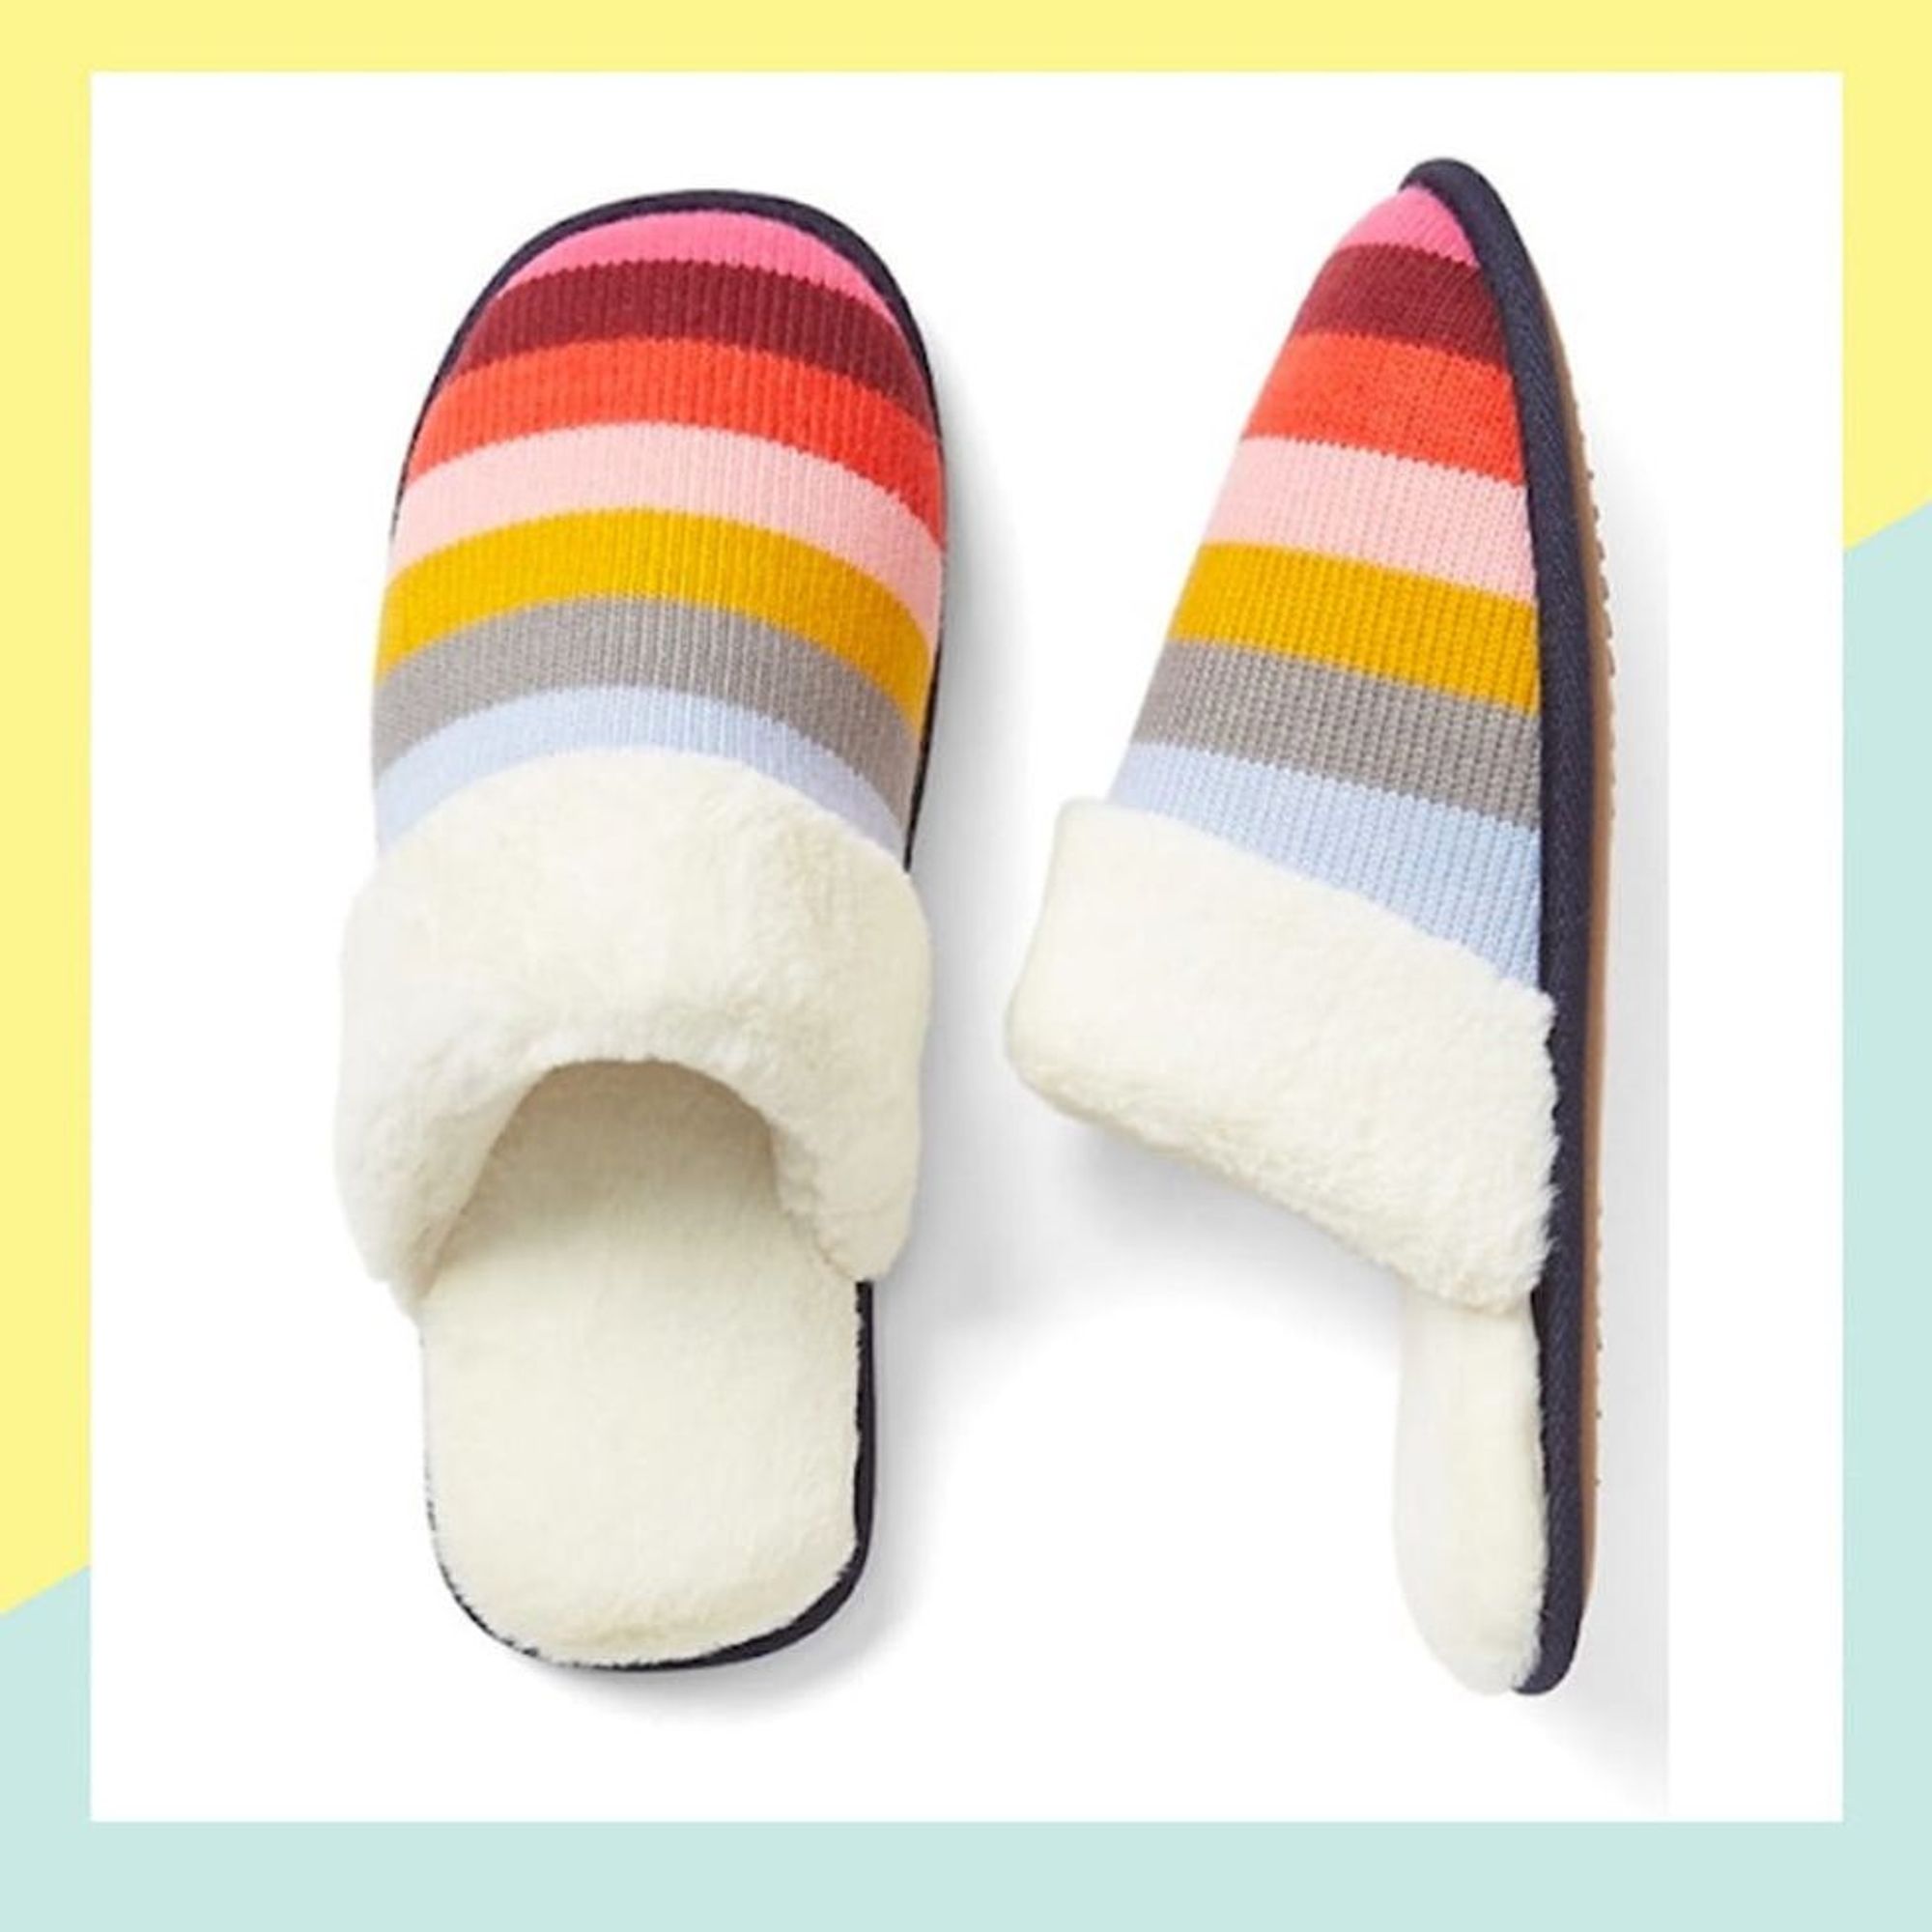 10 Stylish Slippers to Get You Through the StayatHome Season Brit + Co